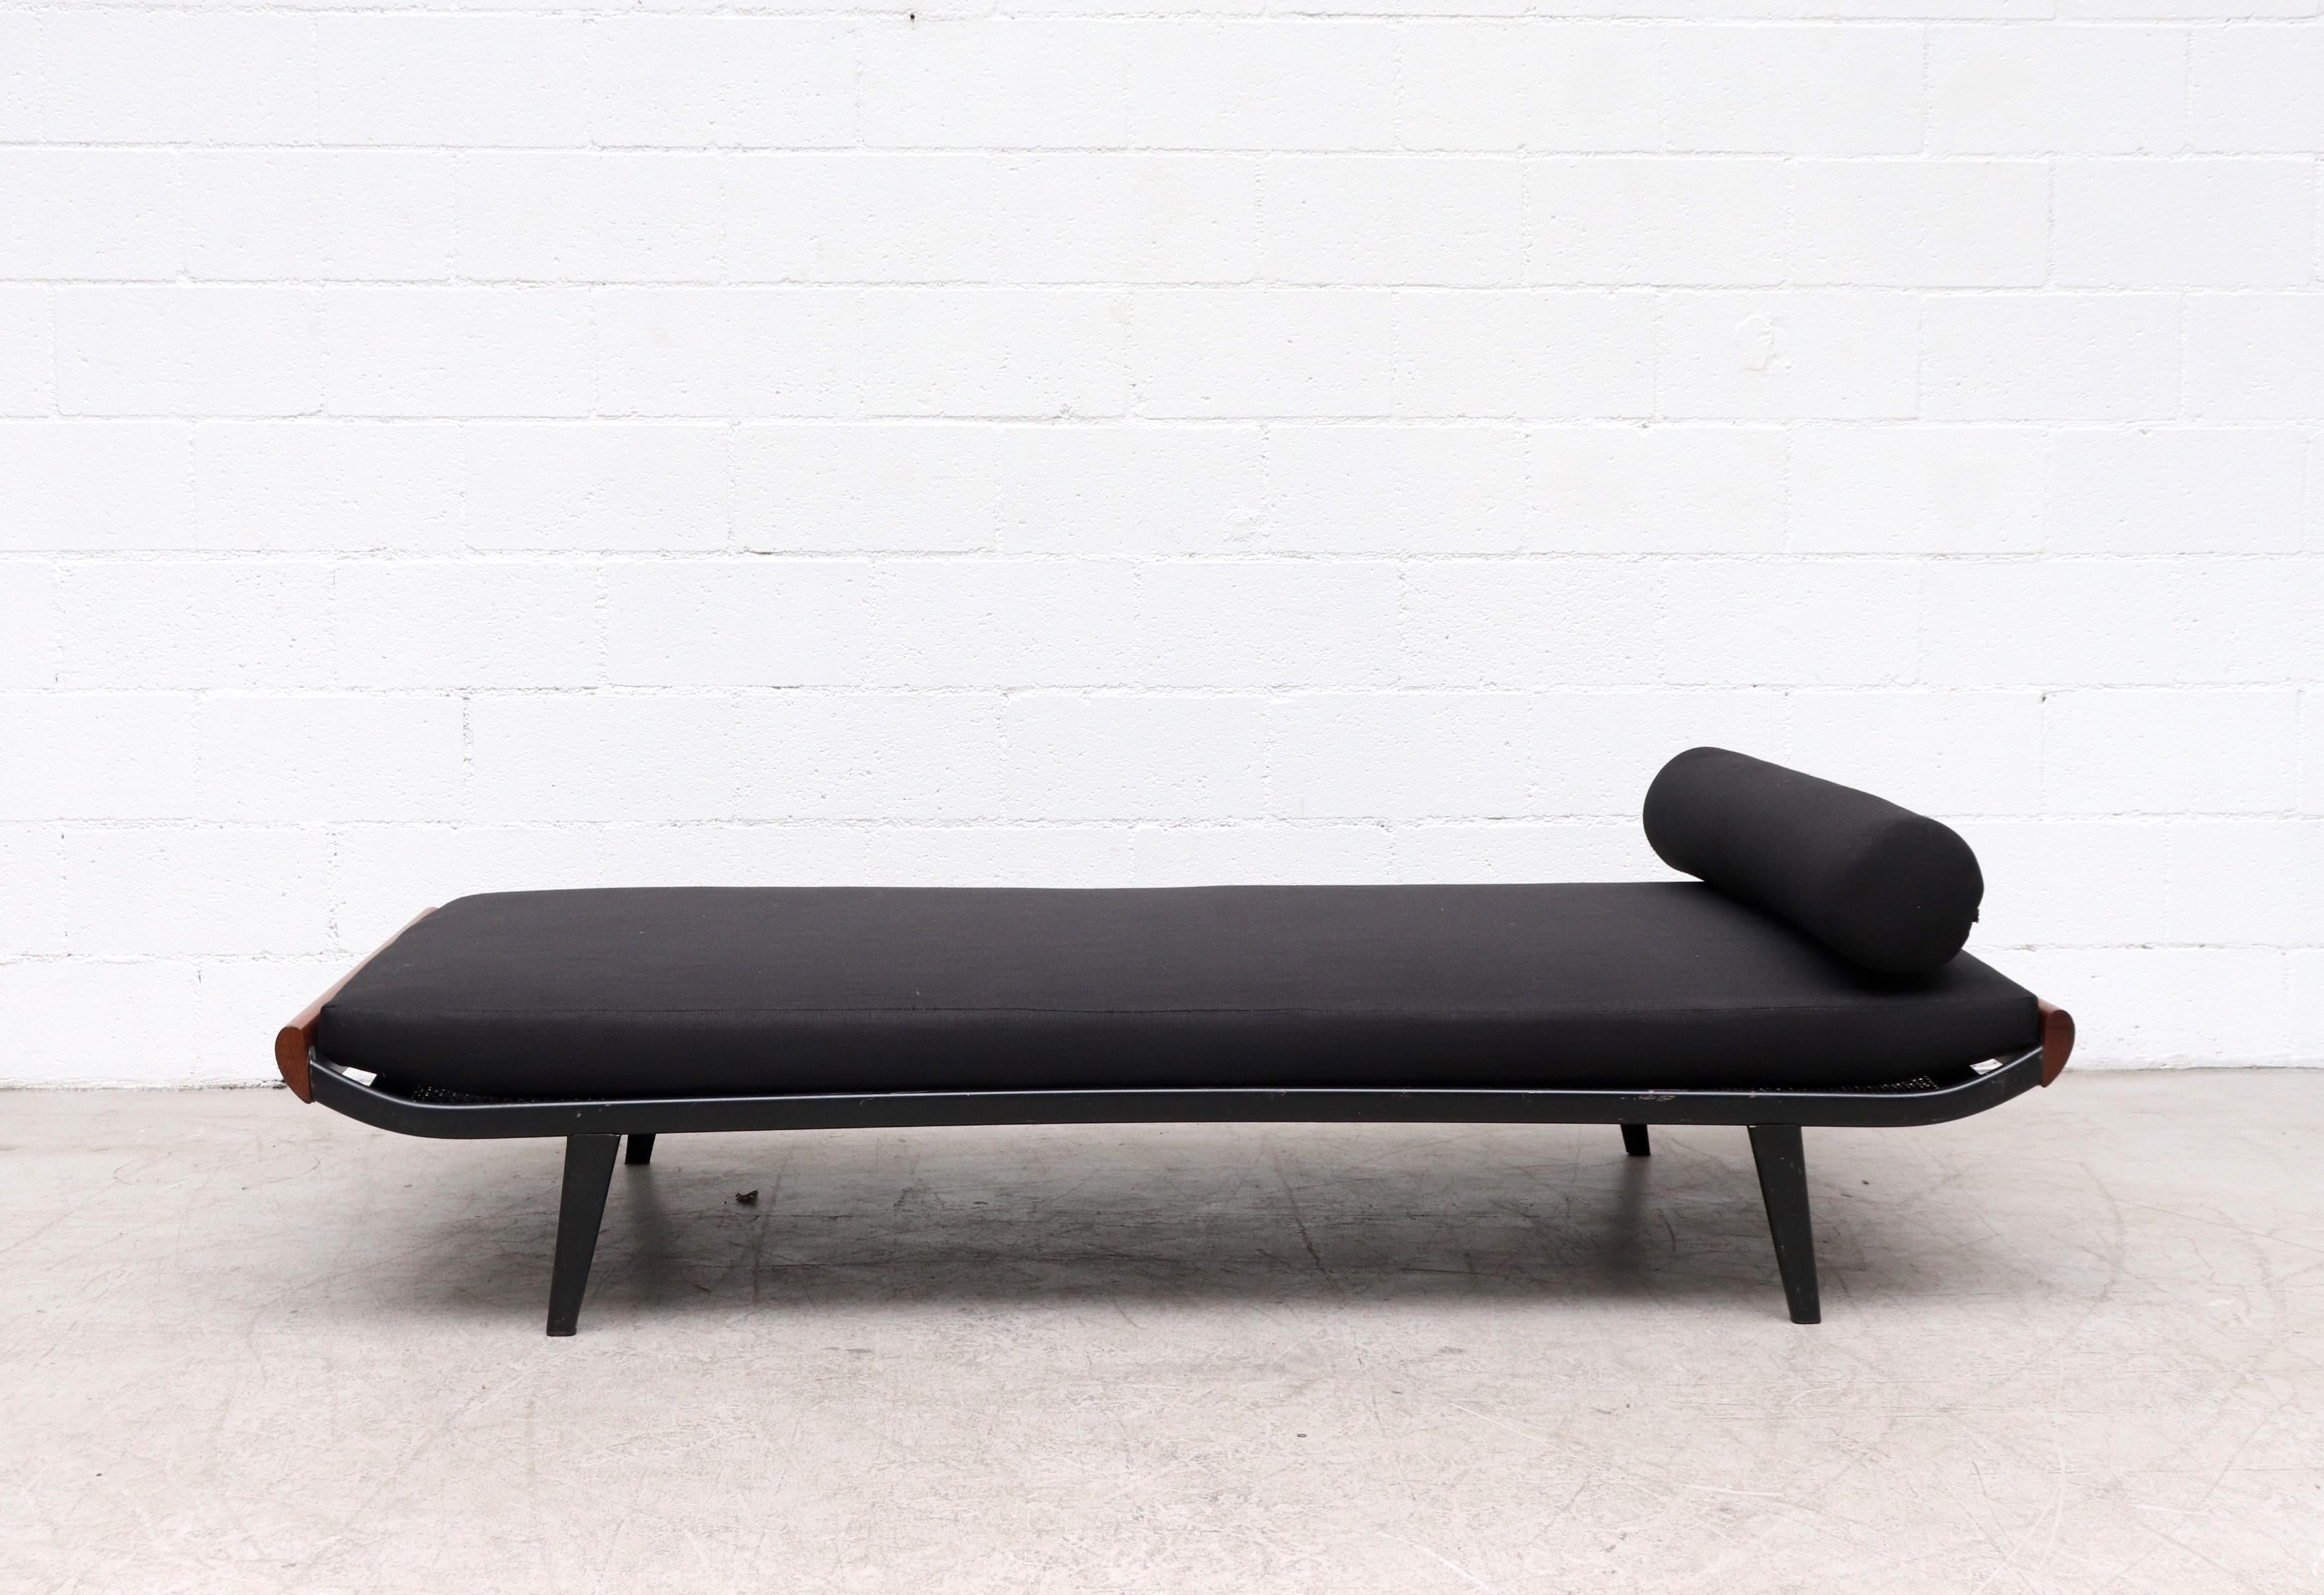 1960s Cleopatra daybed by A.R. Cordemeyer. Teak wood ends with dark grey enameled metal frame and 